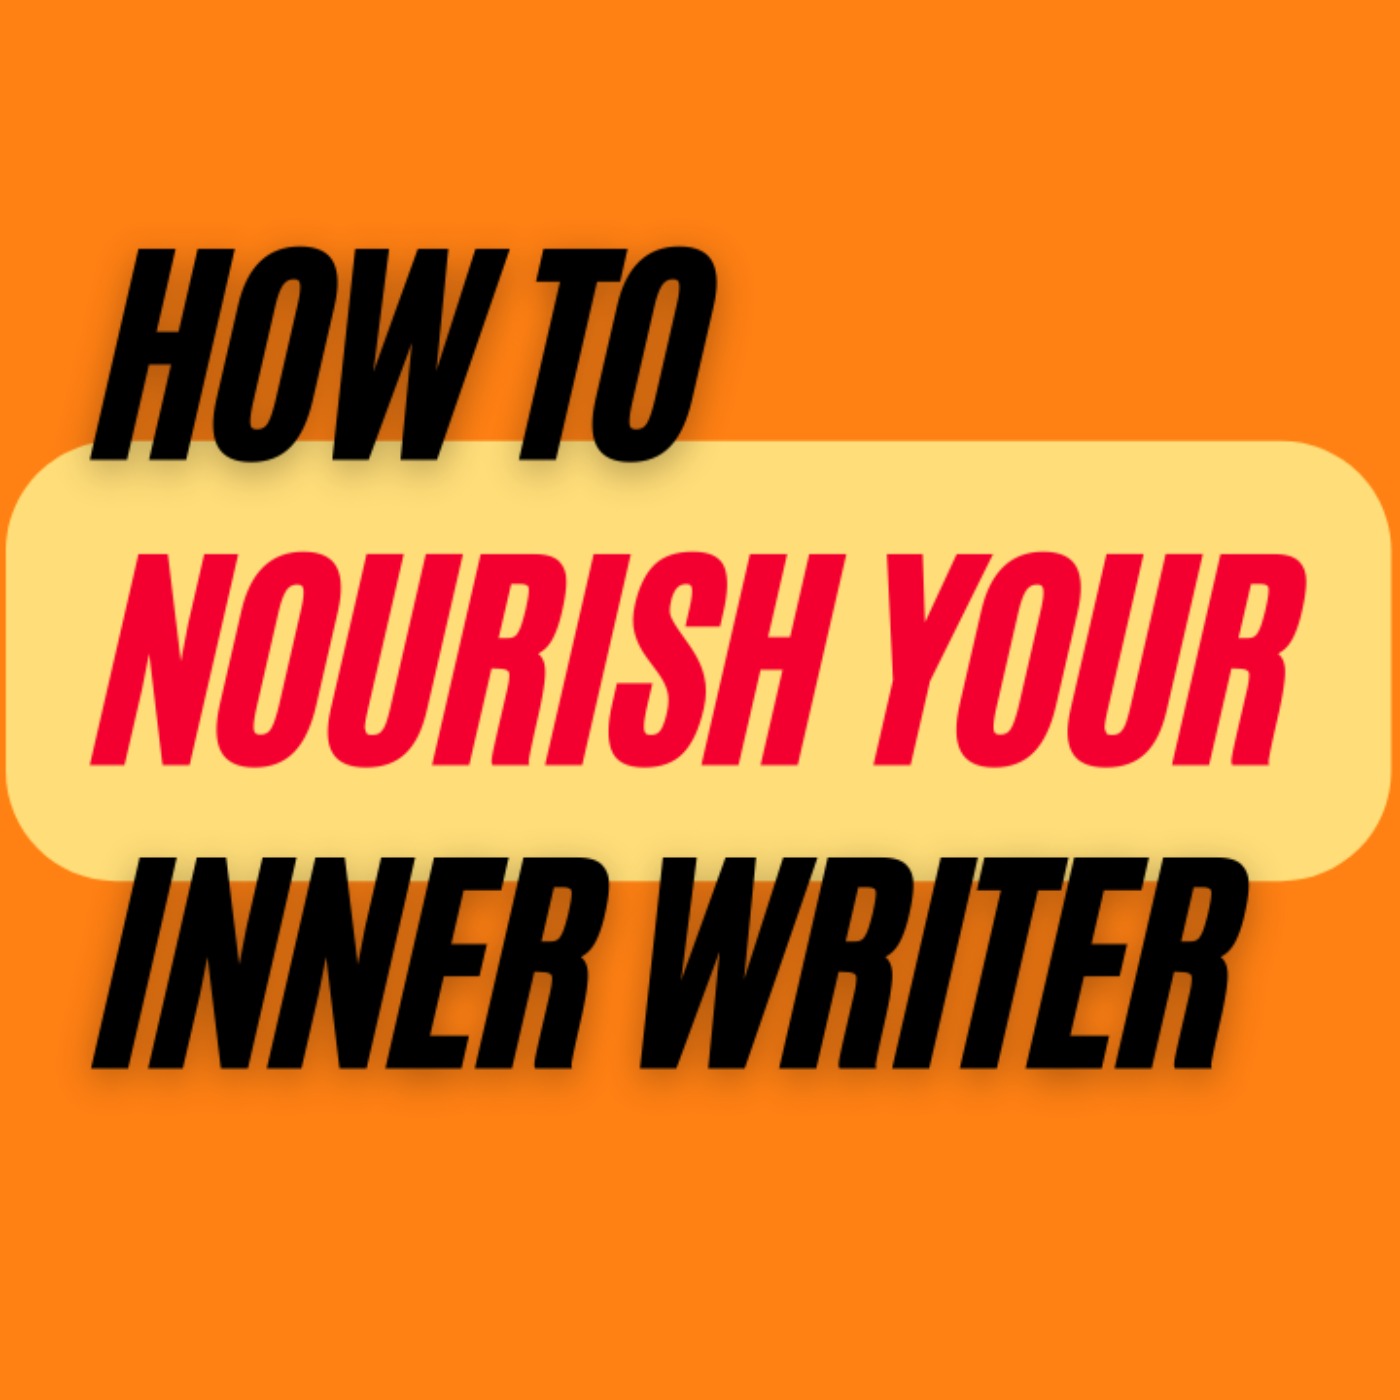 Ep. 352: Layla Khoury-Hanold on How to Nourish Your Inner Writer